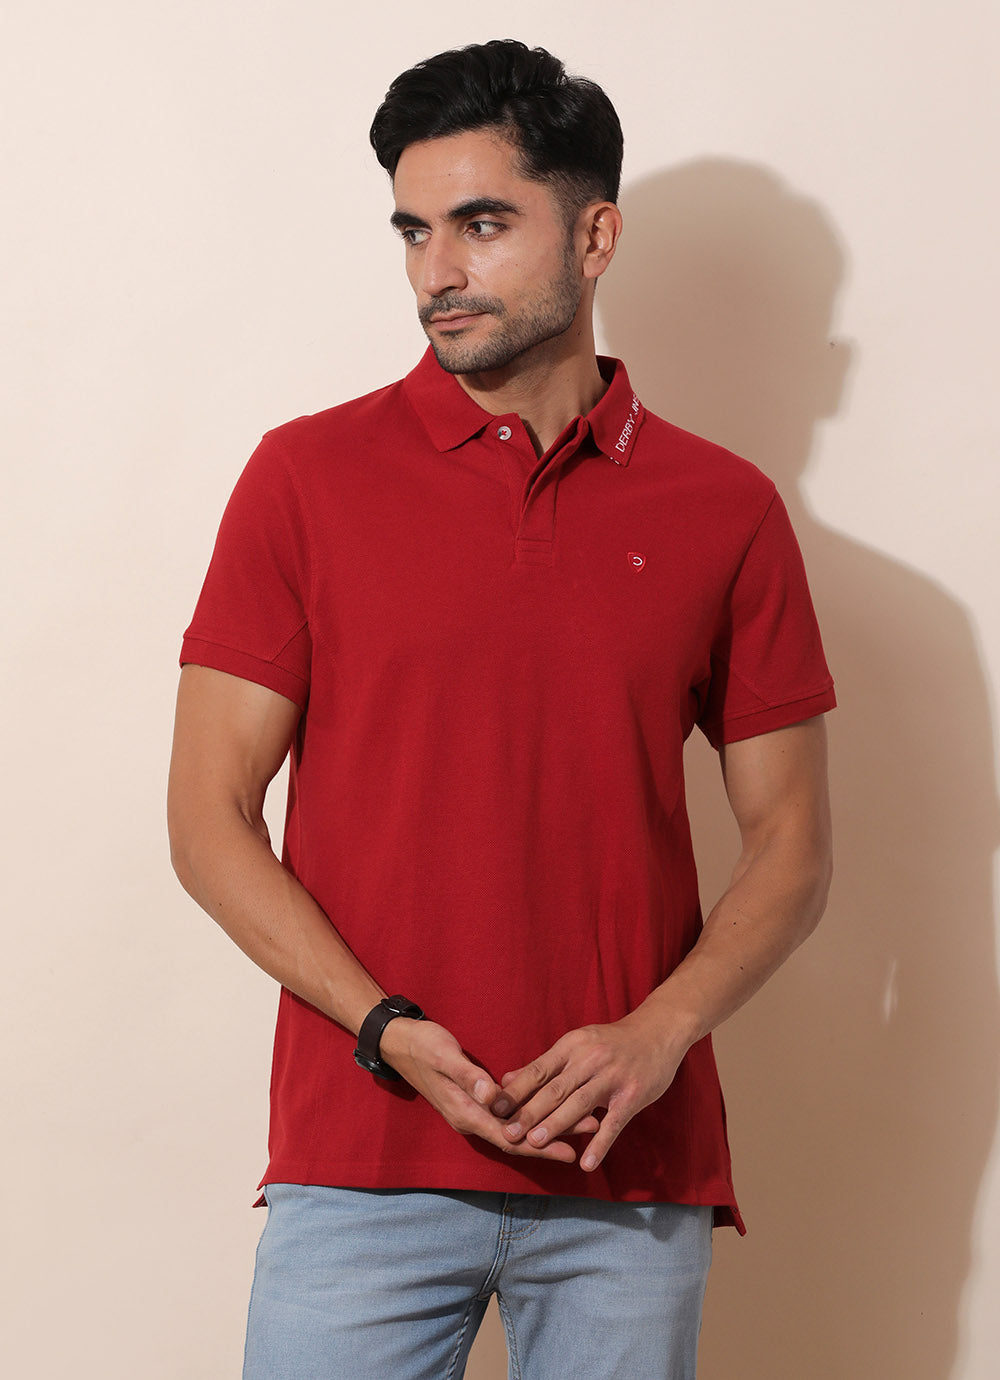 Charming Red (Crafted From Pique Cotton, Featuring A Classic Regular Fit Design).